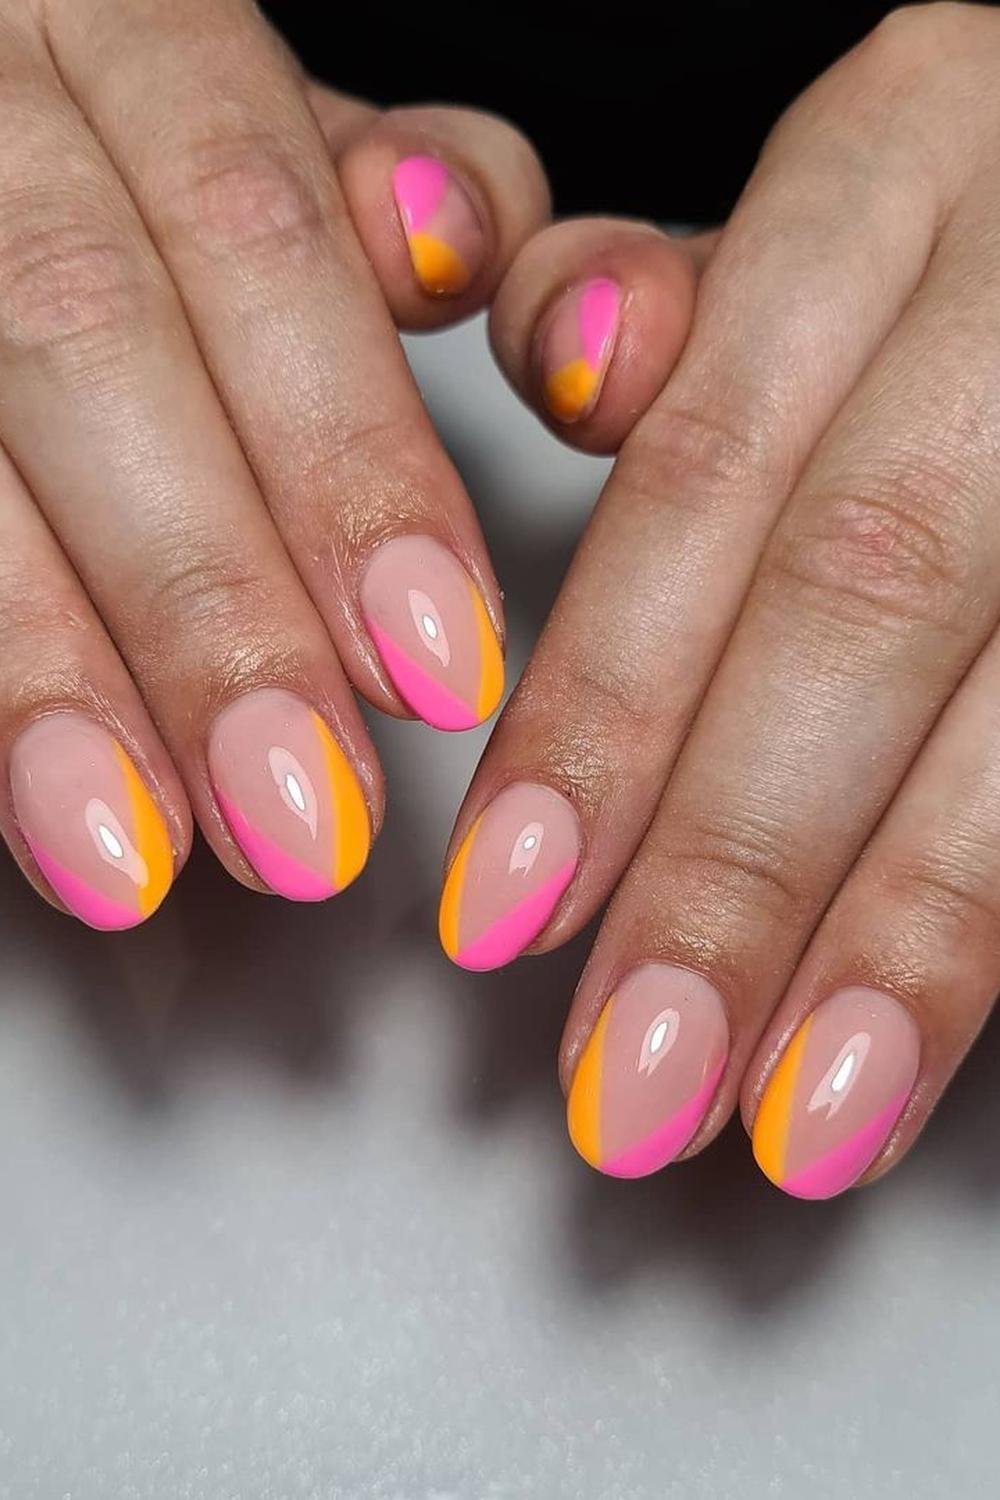 1 - Picture of Pink and Orange Nails